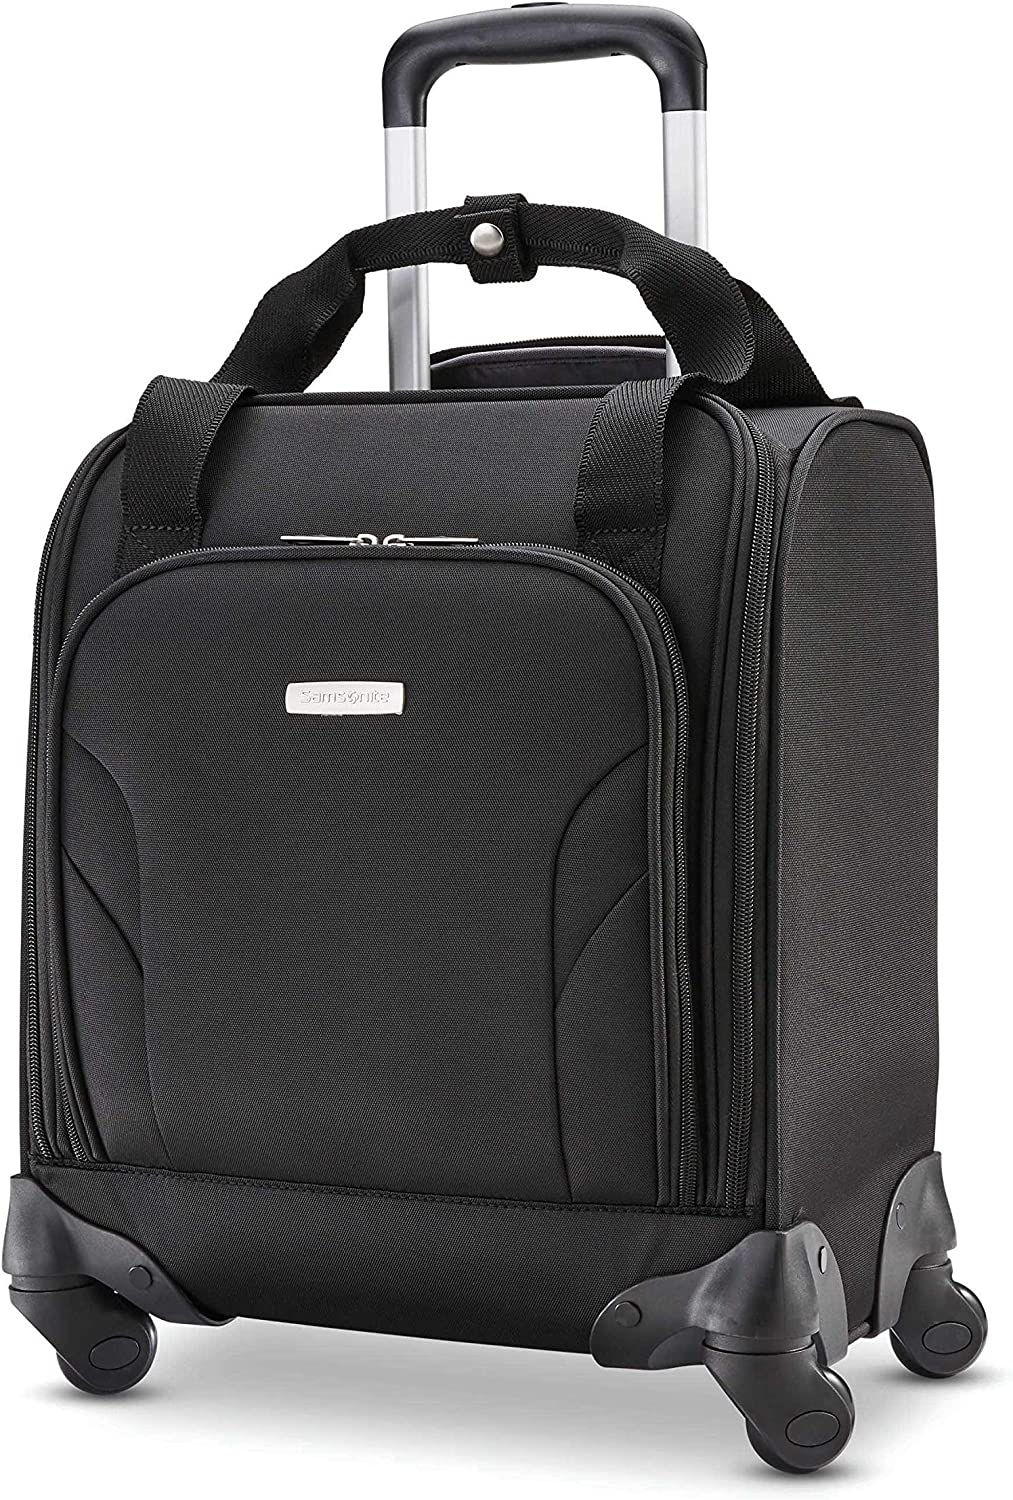 Best Carry on Luggage with Laptop Compartment 2021